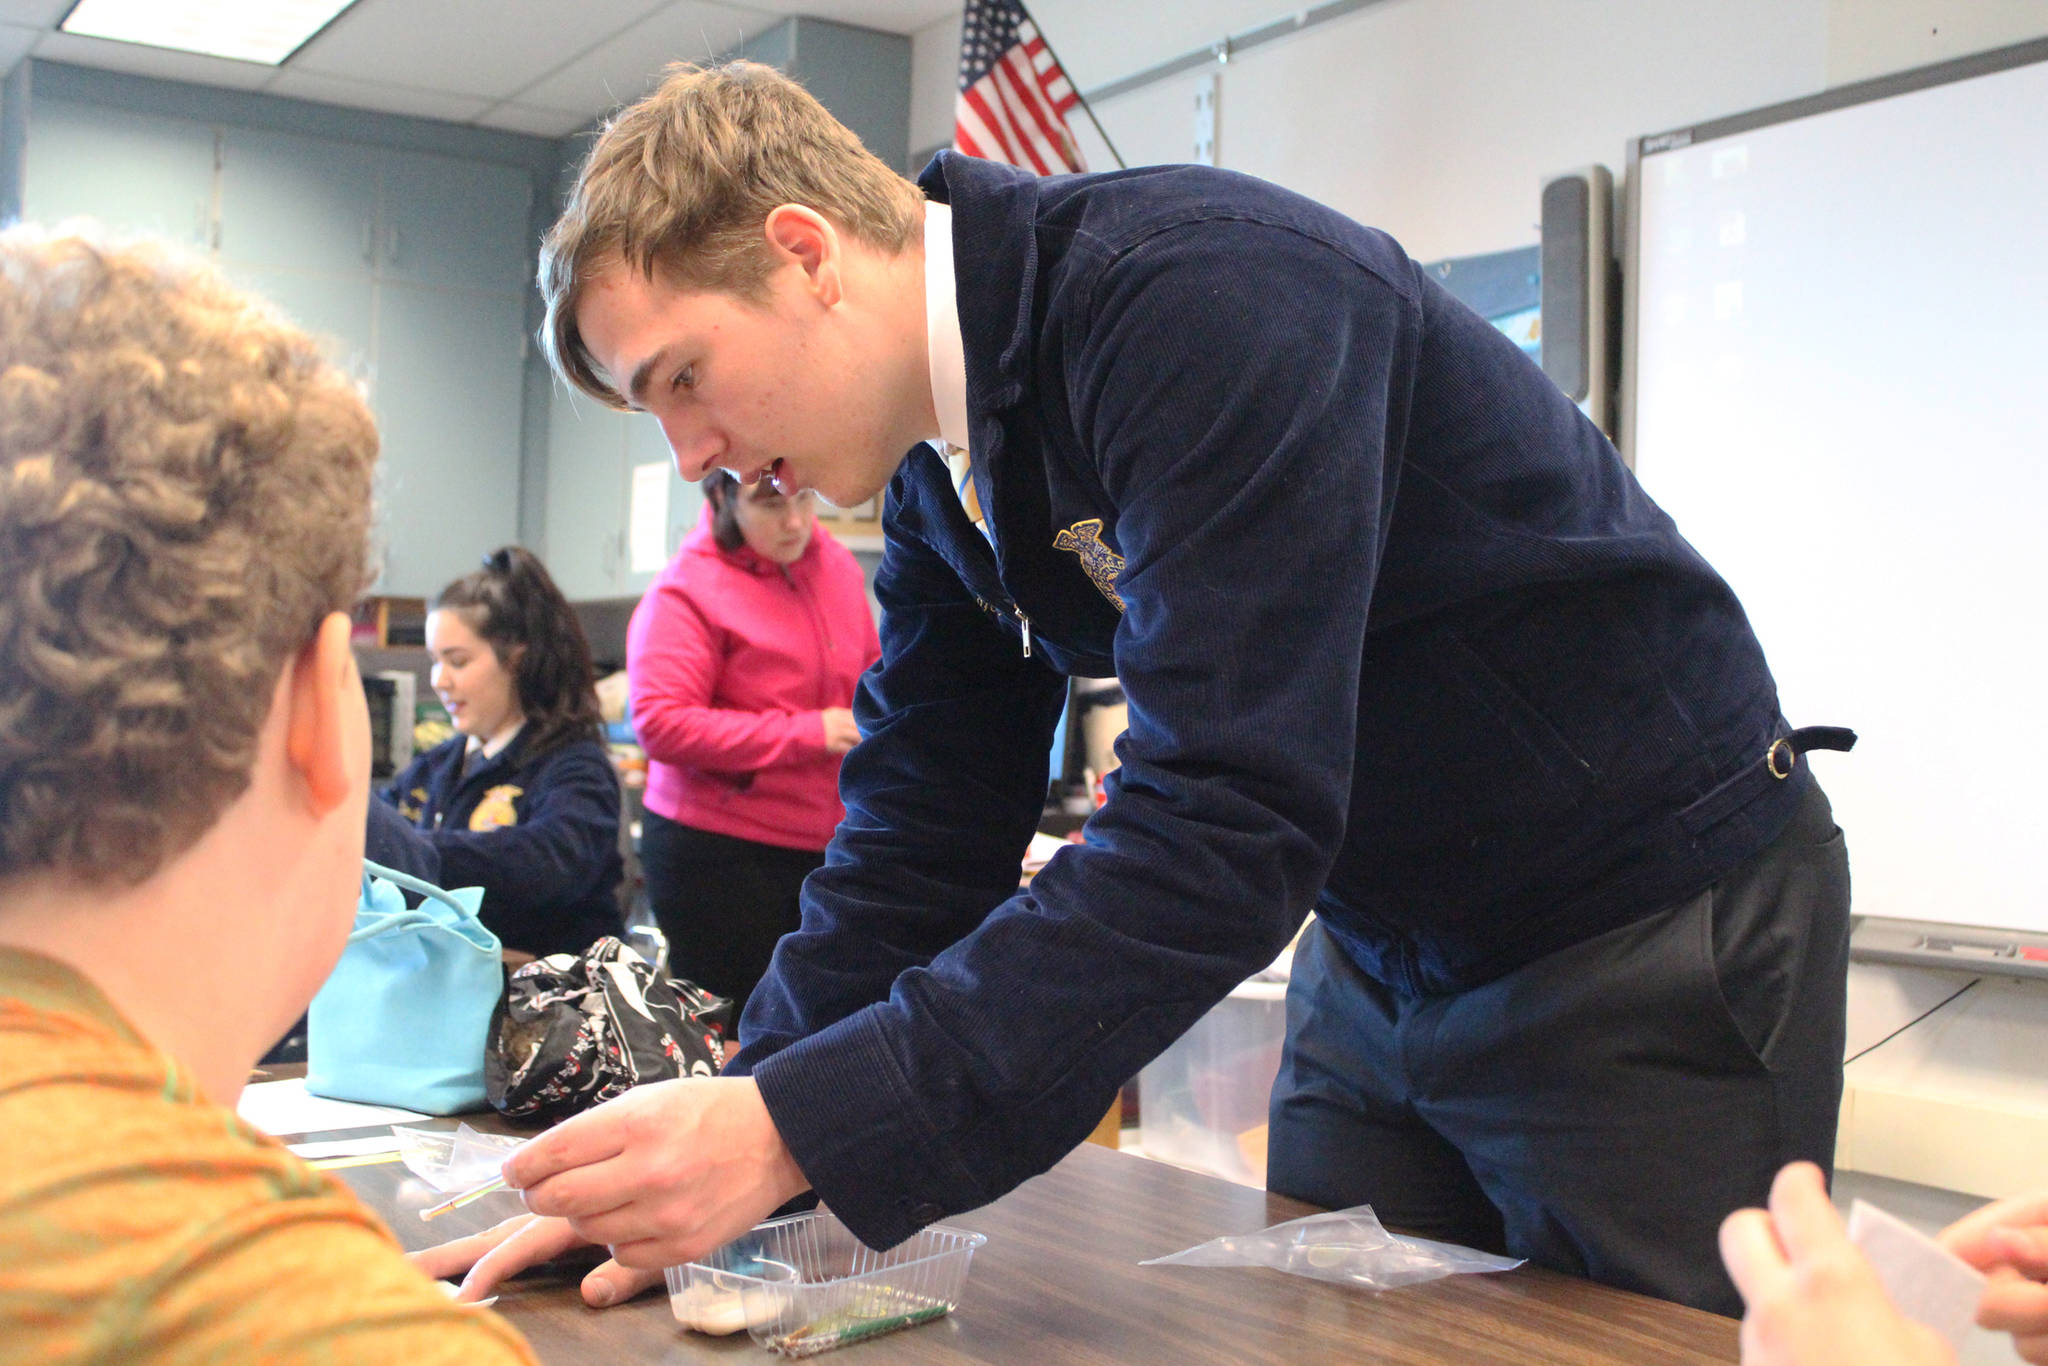 Ninilchik School senior Robert McGinnis shows younger students how to create a seed tape, or a way of storing vegetable seeds for later planting, on Tuesday, May 1, 2018 at the school in Ninilchik, Alaska. He and other representatives of Ninilchik’s chapter of the National FFA Organization visited the school for the first time to host educational sessions on Alaska Agriculture Day. (Photo by Megan Pacer/Homer News)